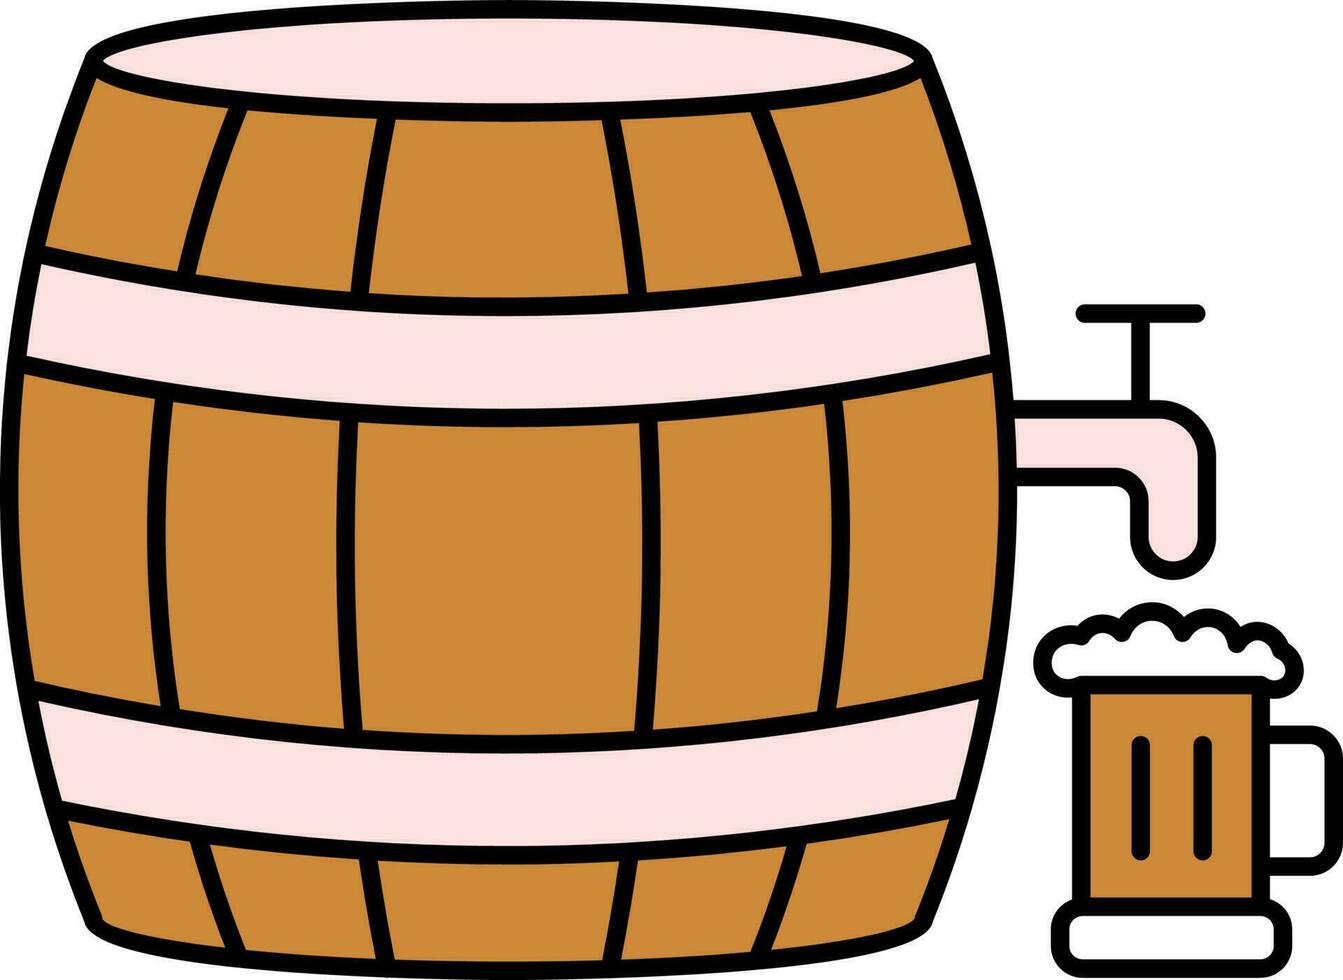 Brown and Pink Barrel Tap with Glass Icon. vector